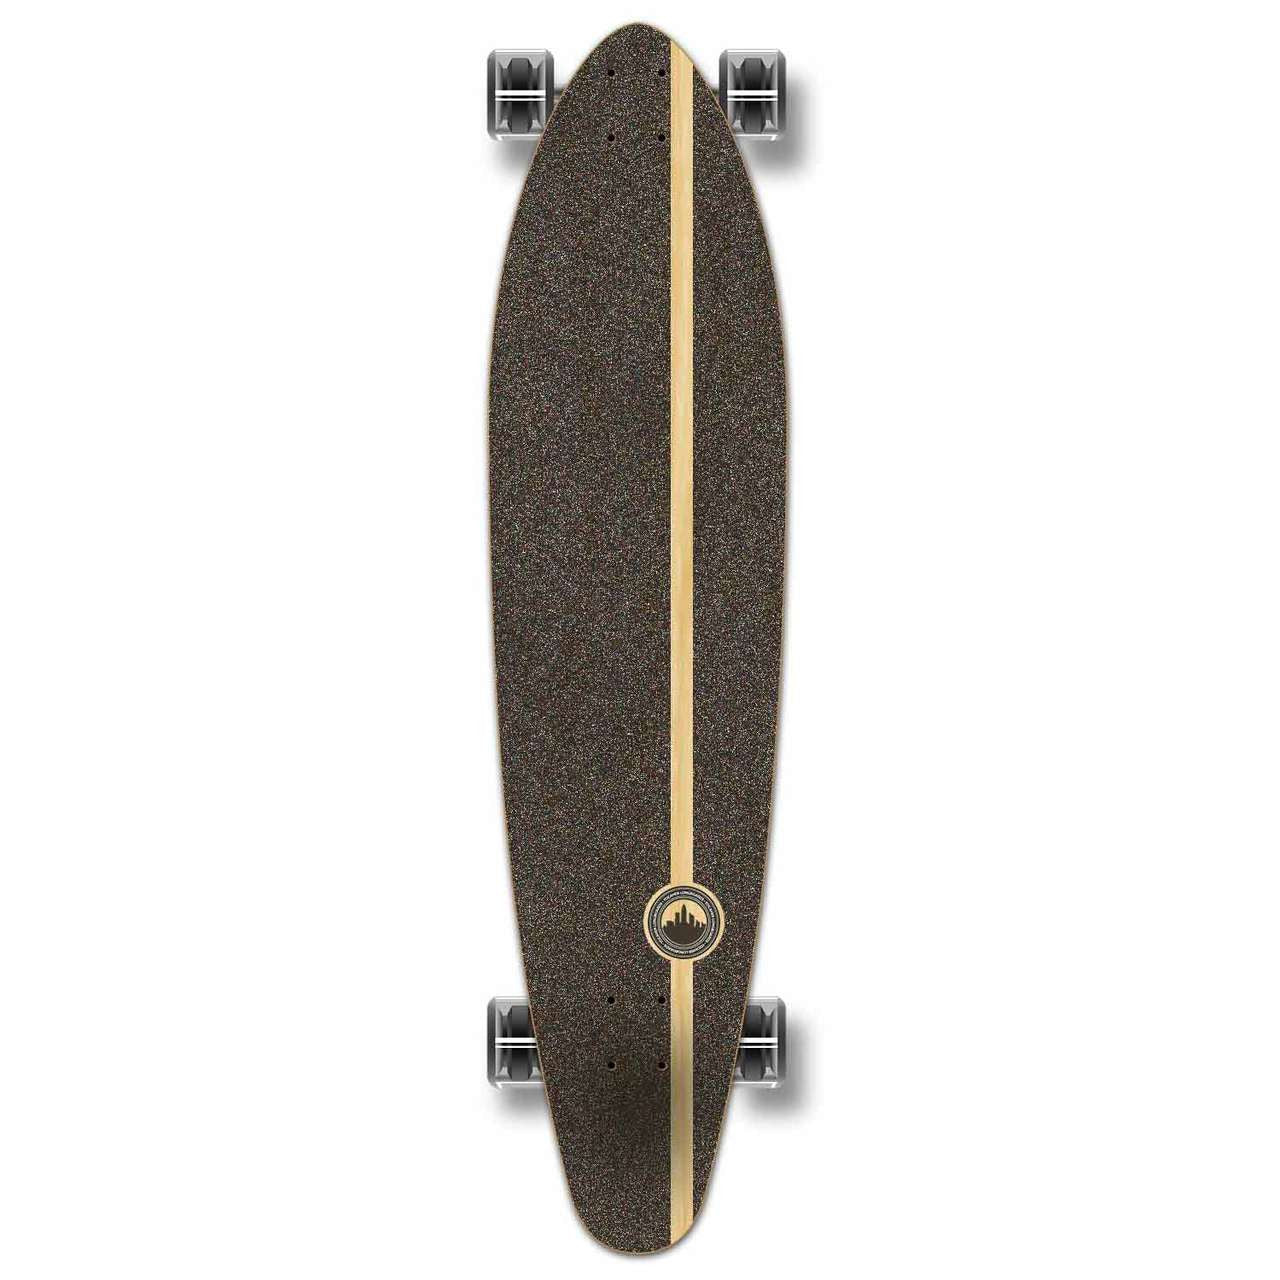 Yocaher Kicktail Longboard Complete - Stained Green